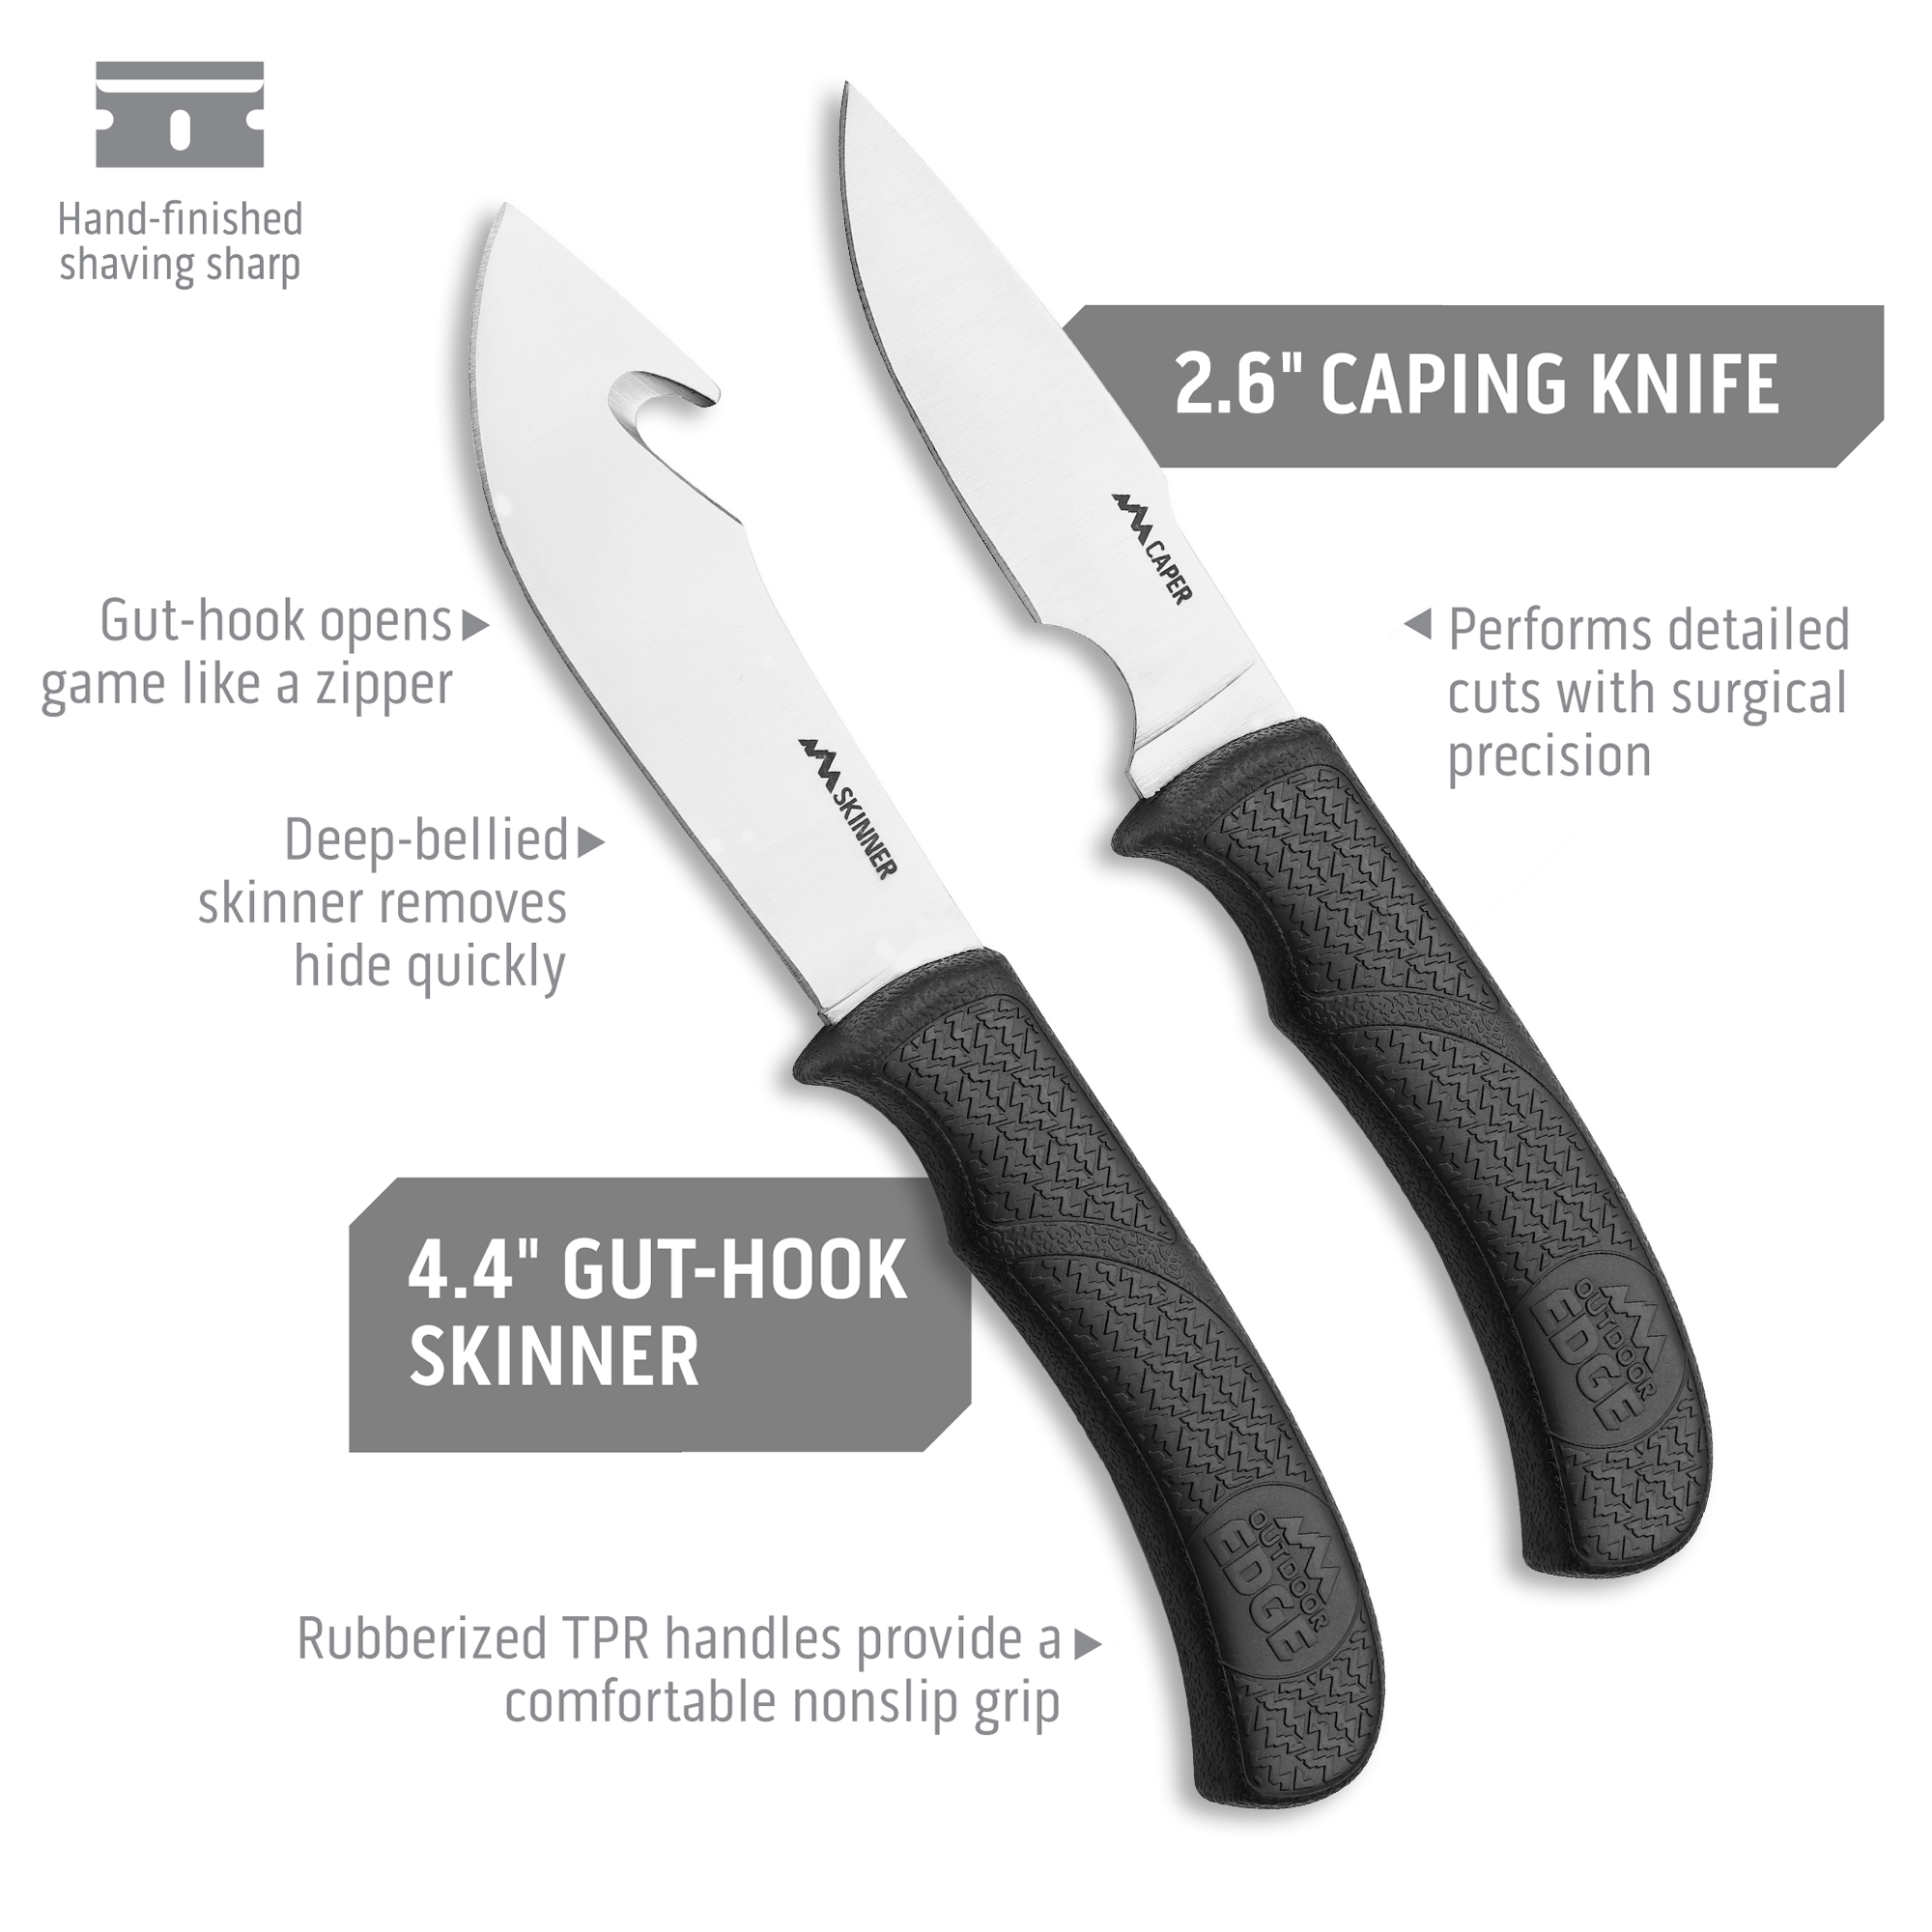 Outdoor Edge Outfitter Hunting Knife Set Product Photo showing blade lengths on caping knife and gut-hook skinner.